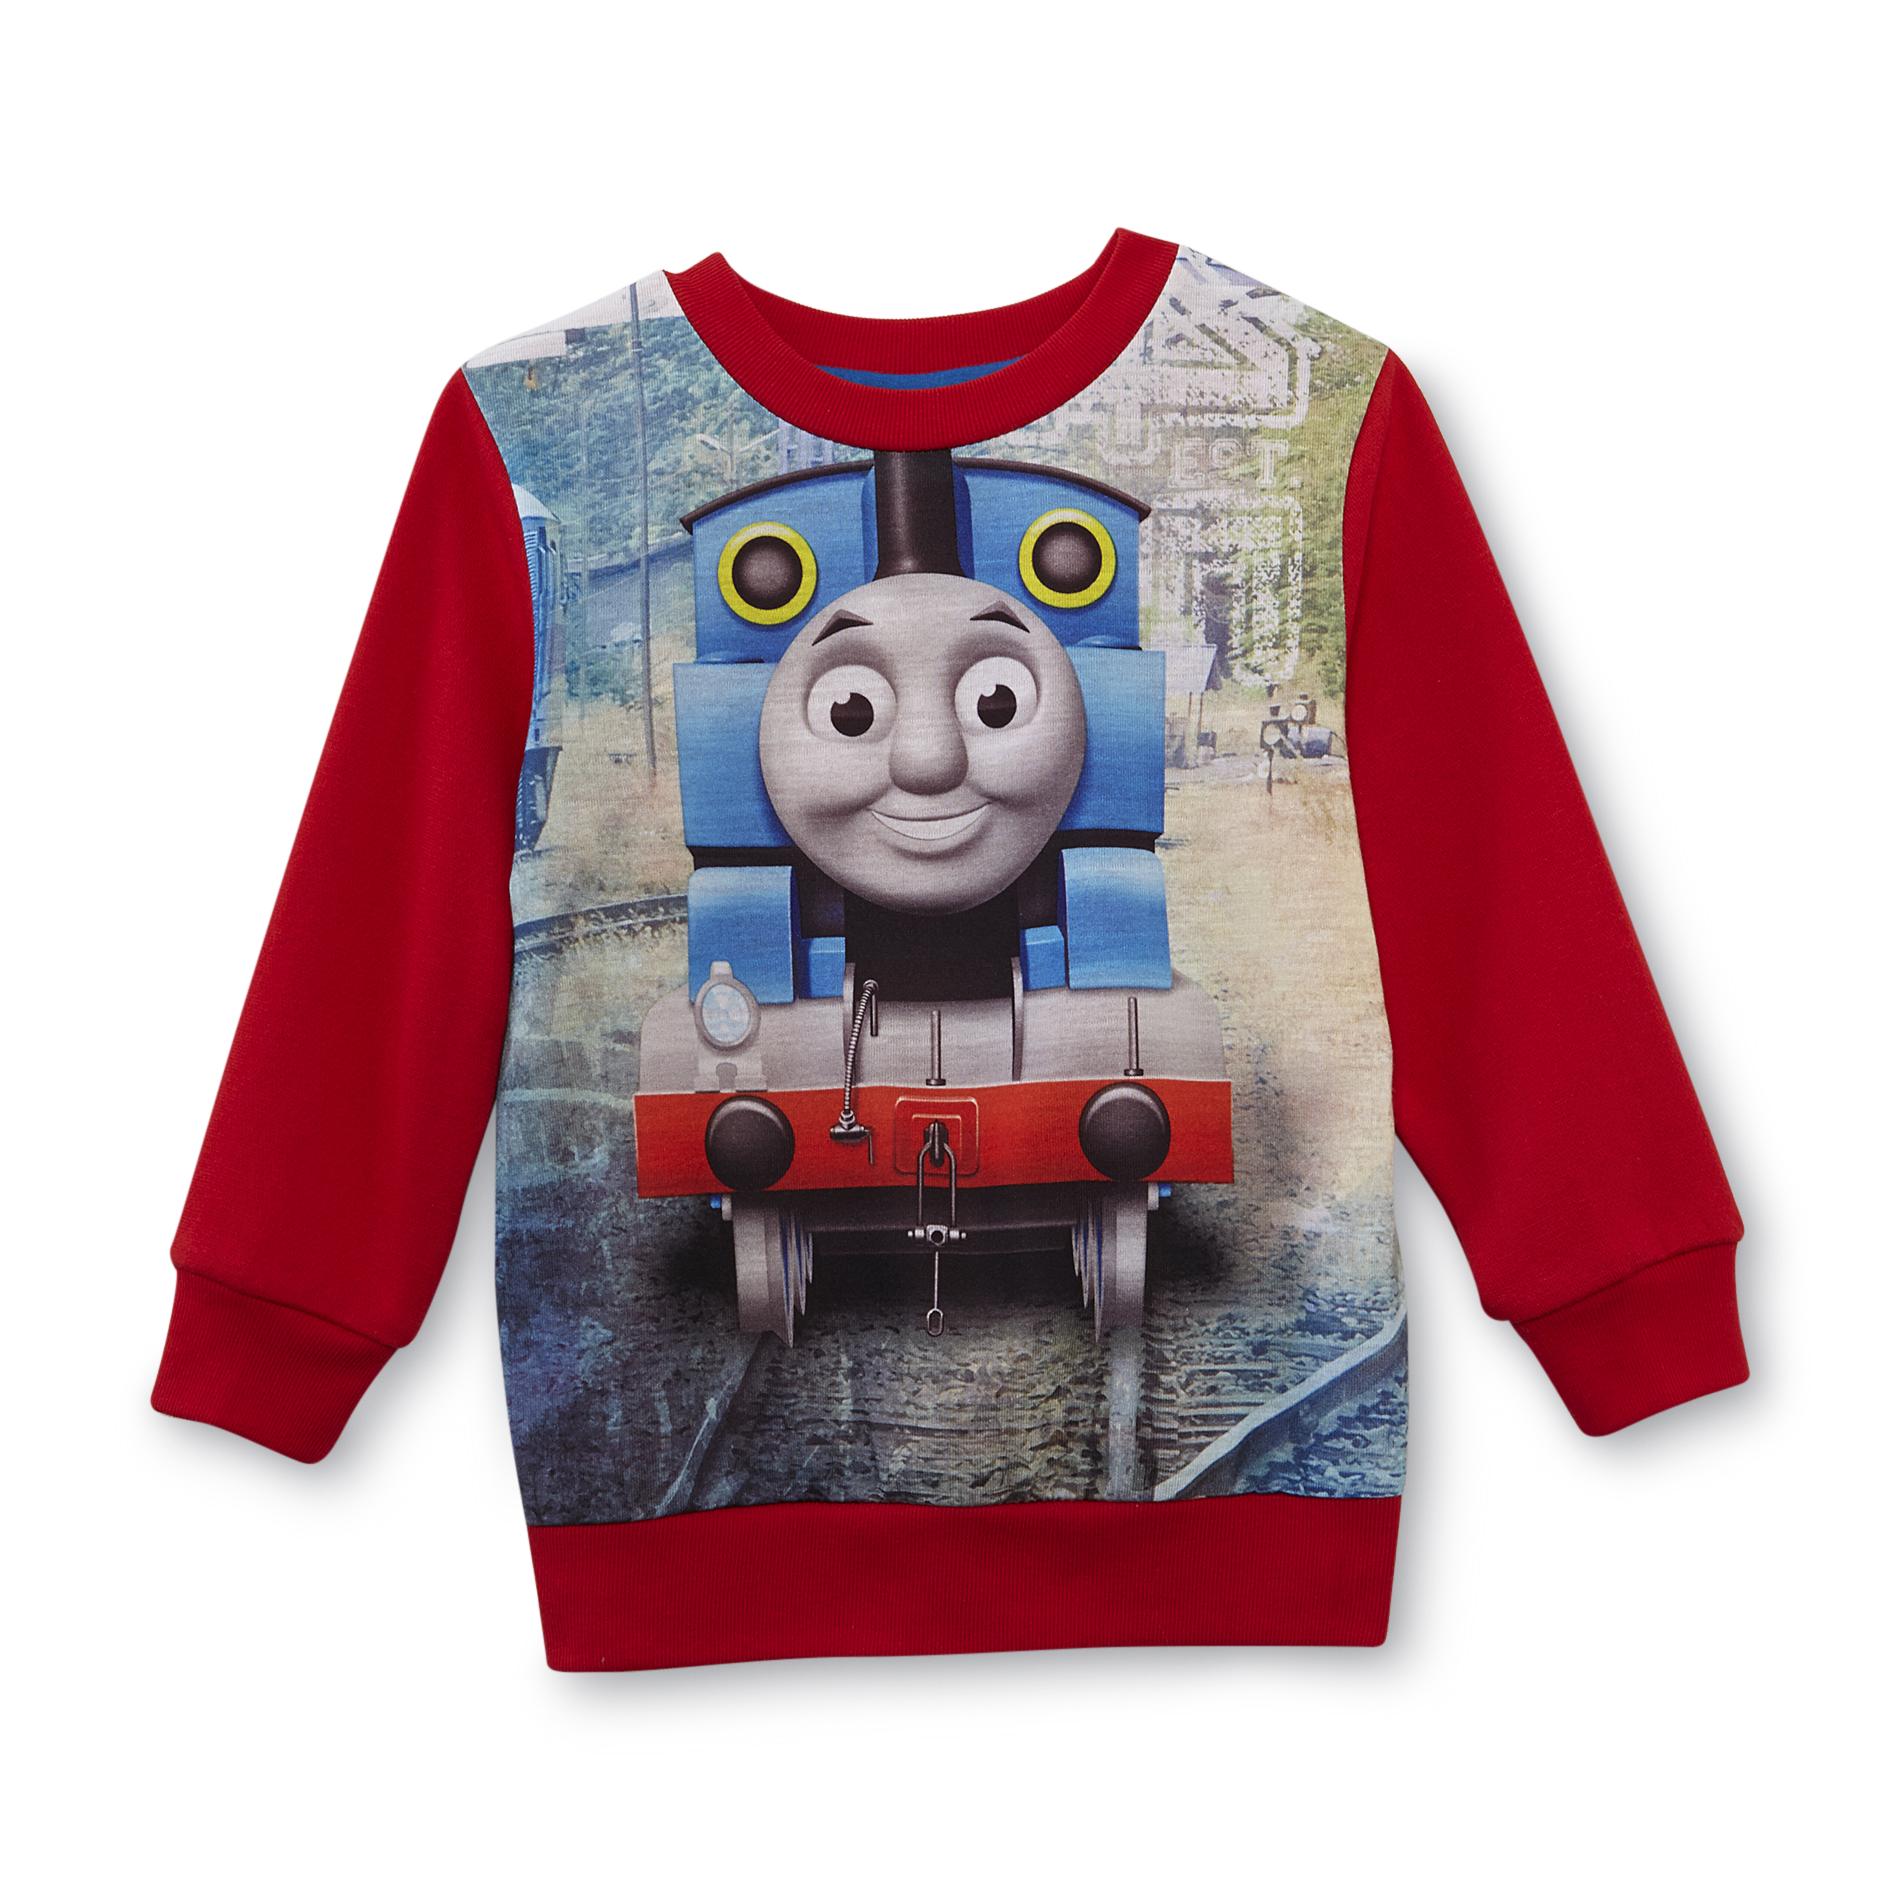 Thomas & Friends Toddler Boy's Graphic Sweater